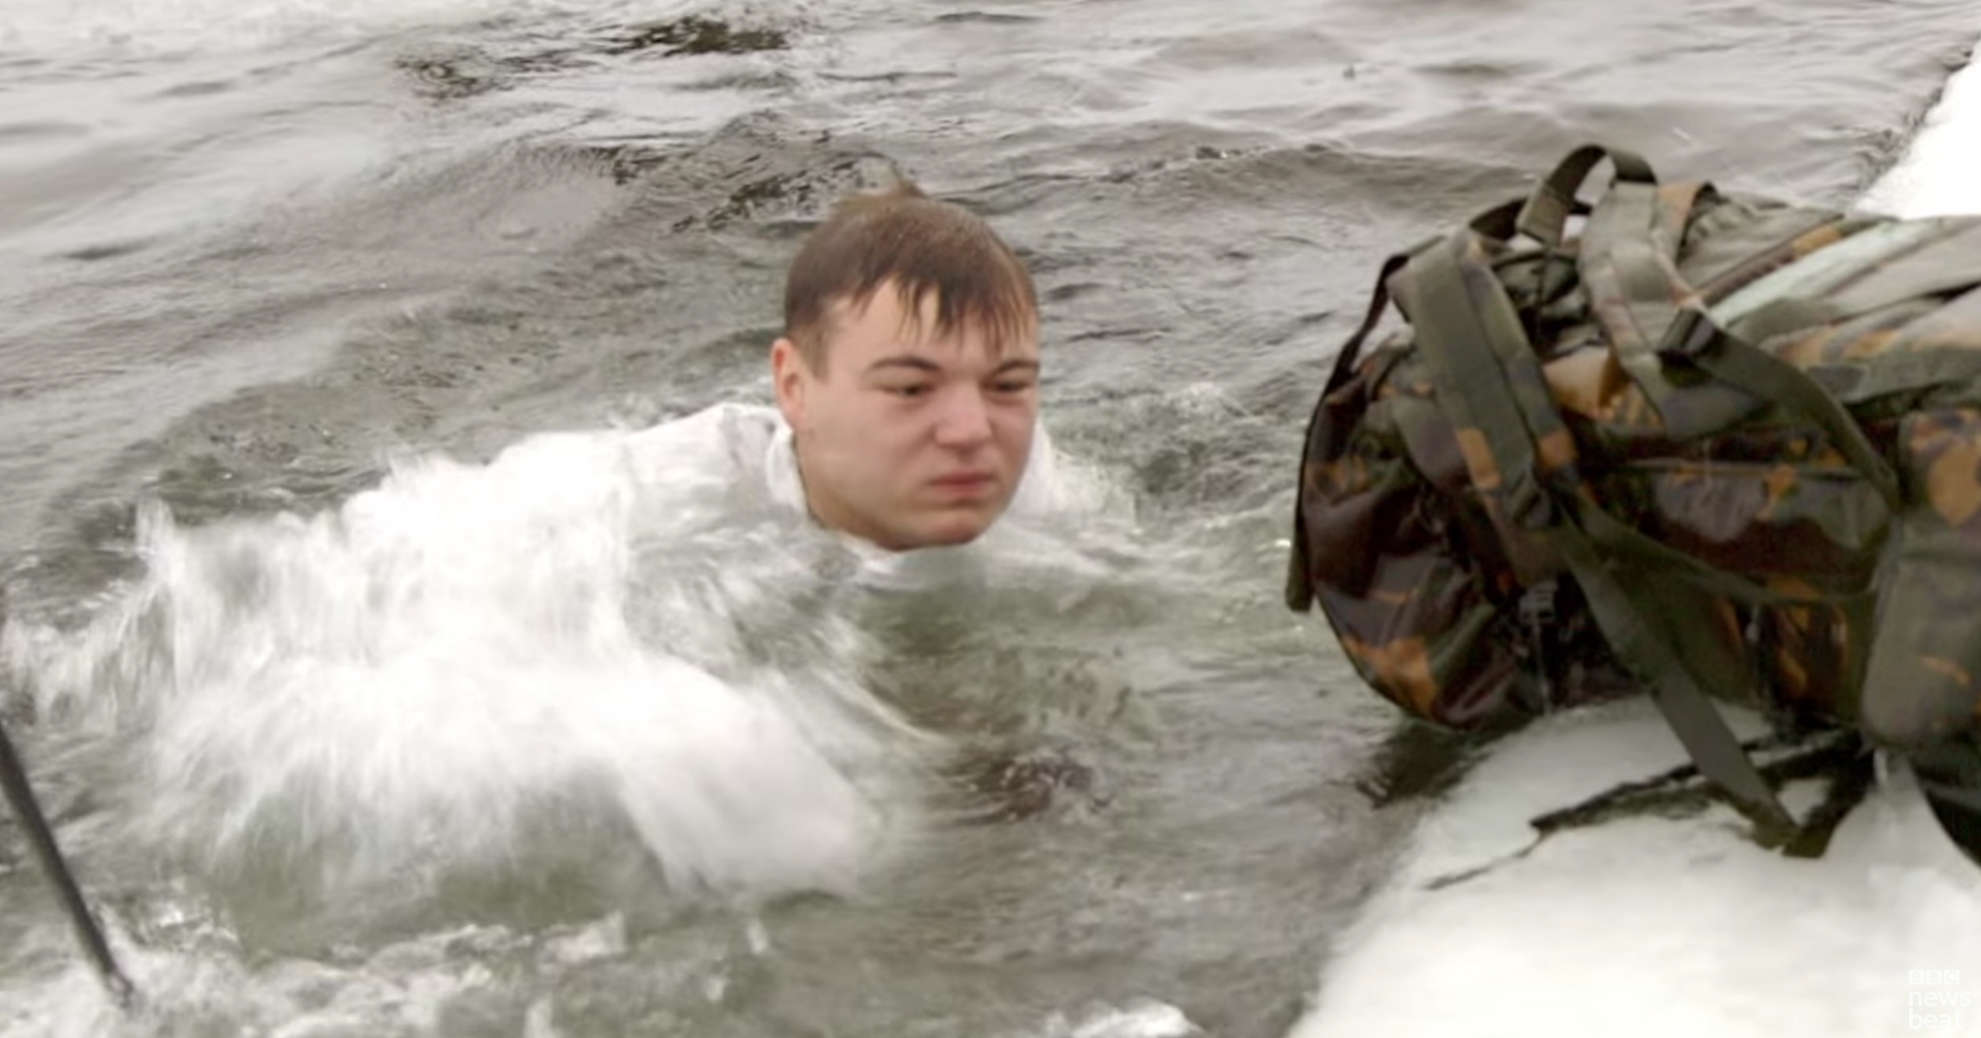 Watch the Brits teach these U.S. Marines how to ‘fight in the freezer’